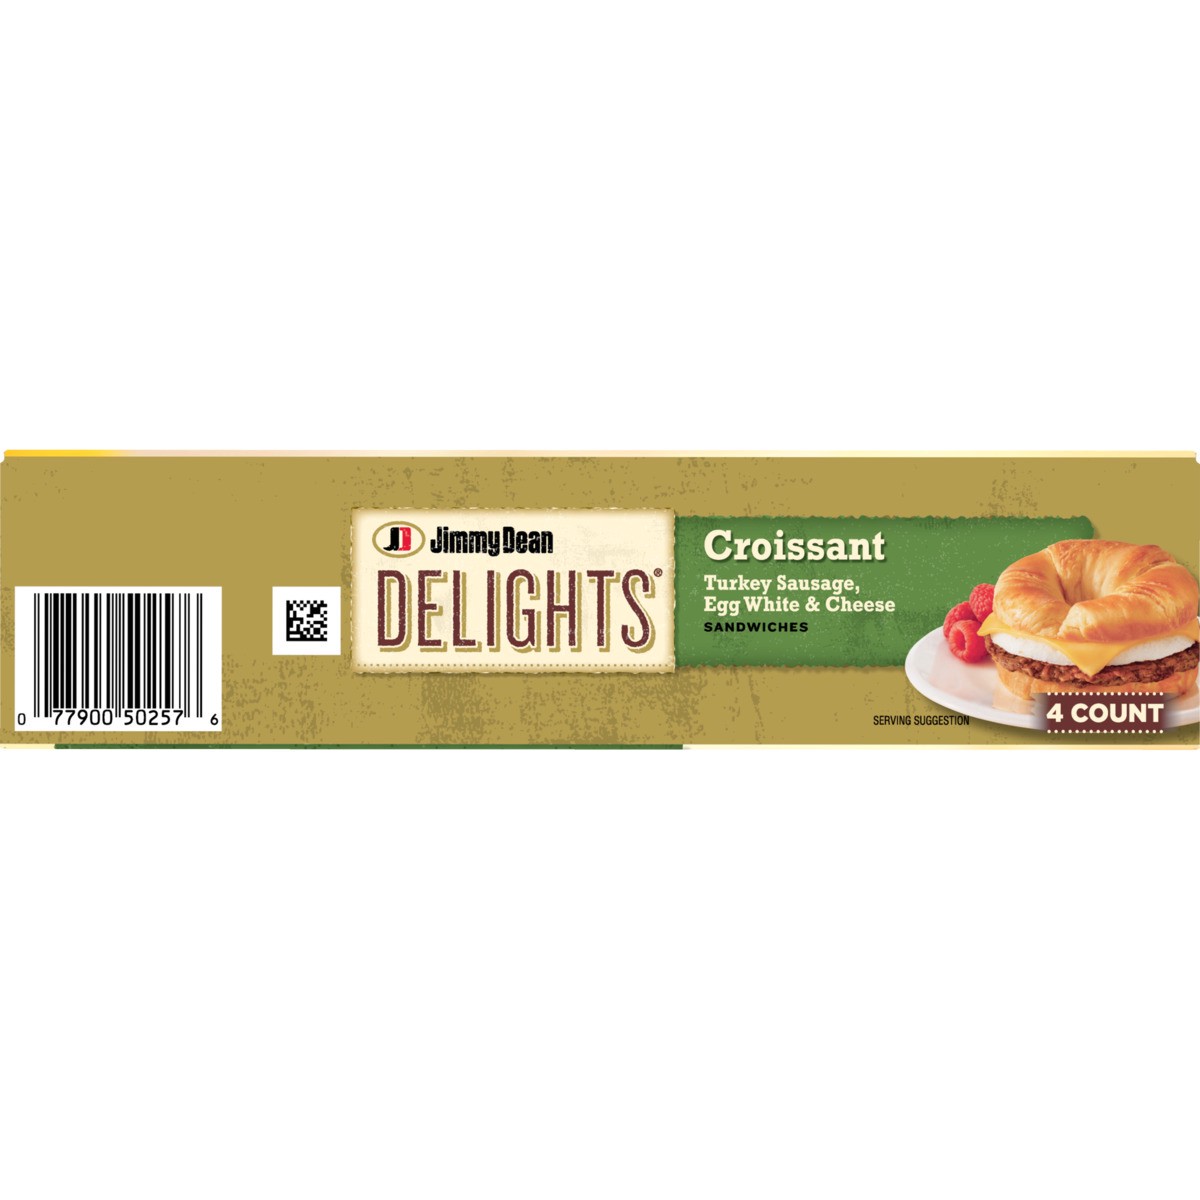 slide 4 of 9, Jimmy Dean Delights Croissant Breakfast Sandwiches with Turkey Sausage, Egg White, and Cheese, Frozen, 4 Count, 544.31 g